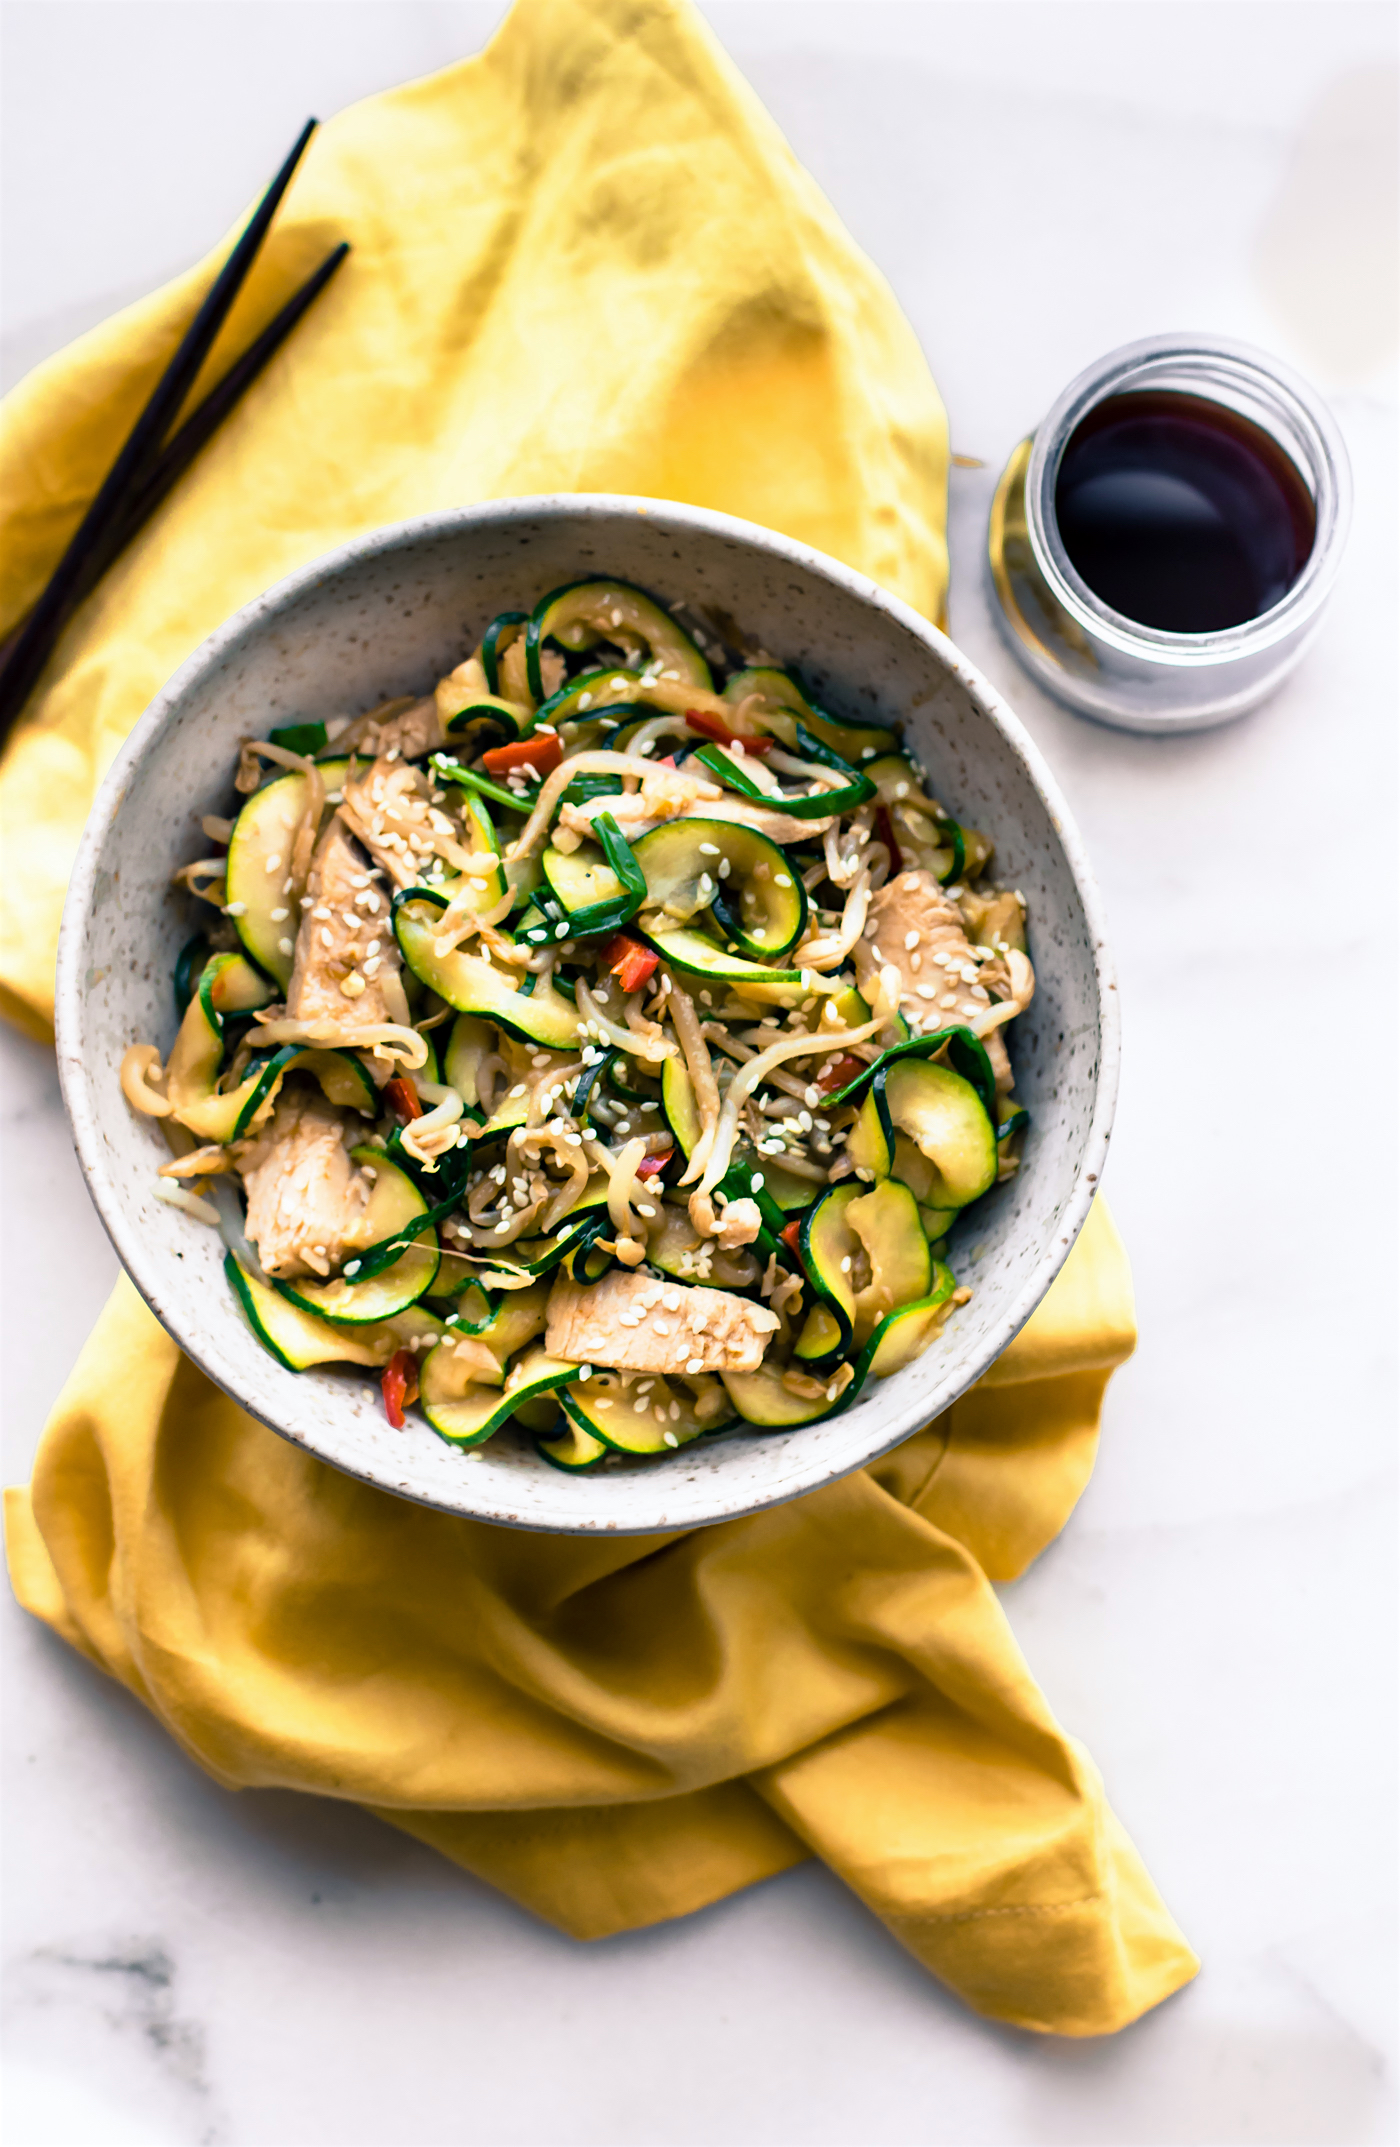 healthy turkey stir fry made with zucchini noodles and leftover holiday turkey and veggies